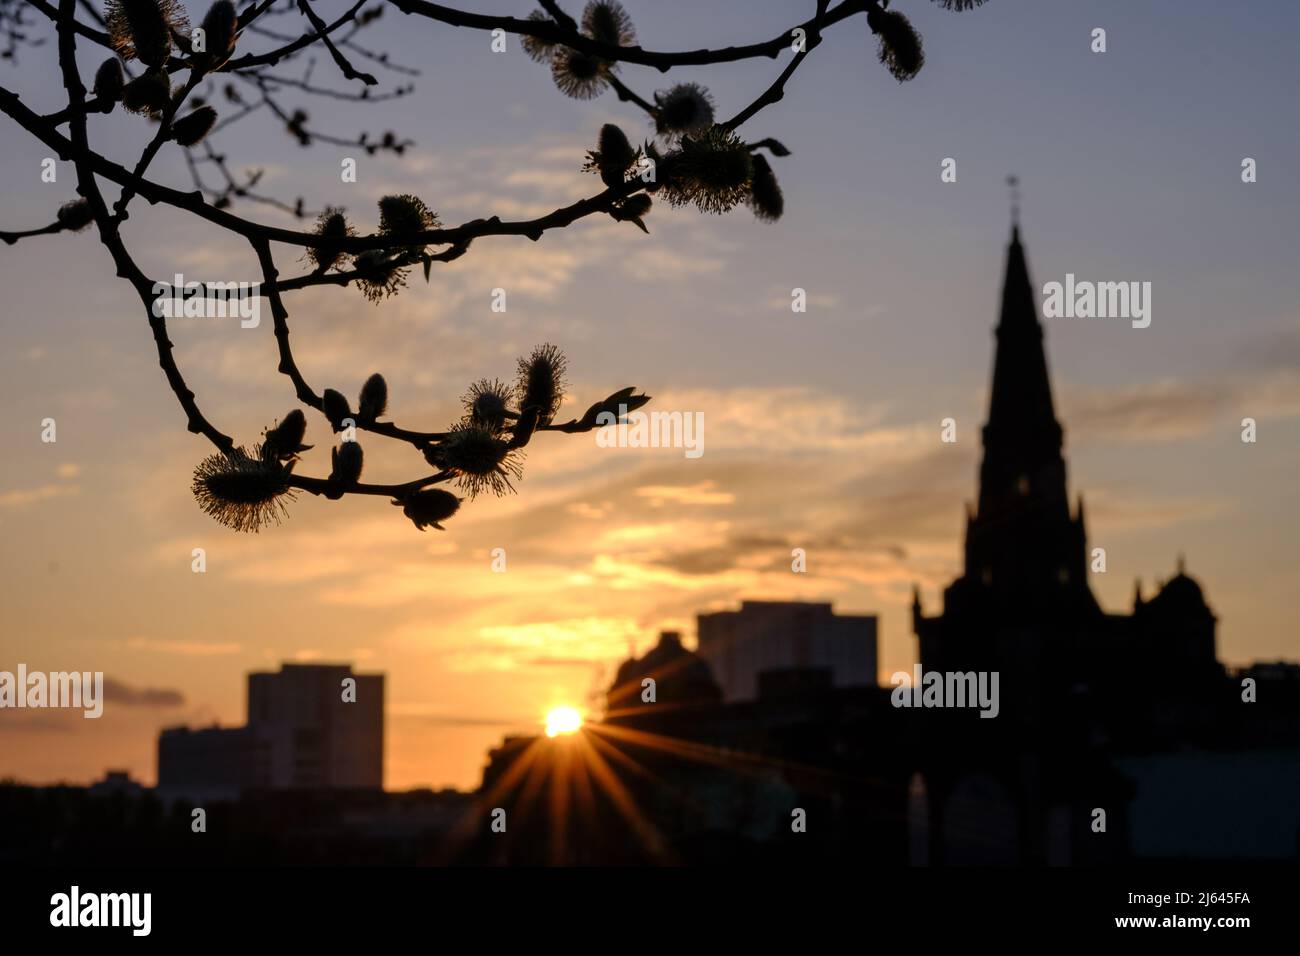 Glasgow Cathedral As Seen From The Necropolis At Sunset, With Focus On Branches In The Foreground Stock Photo